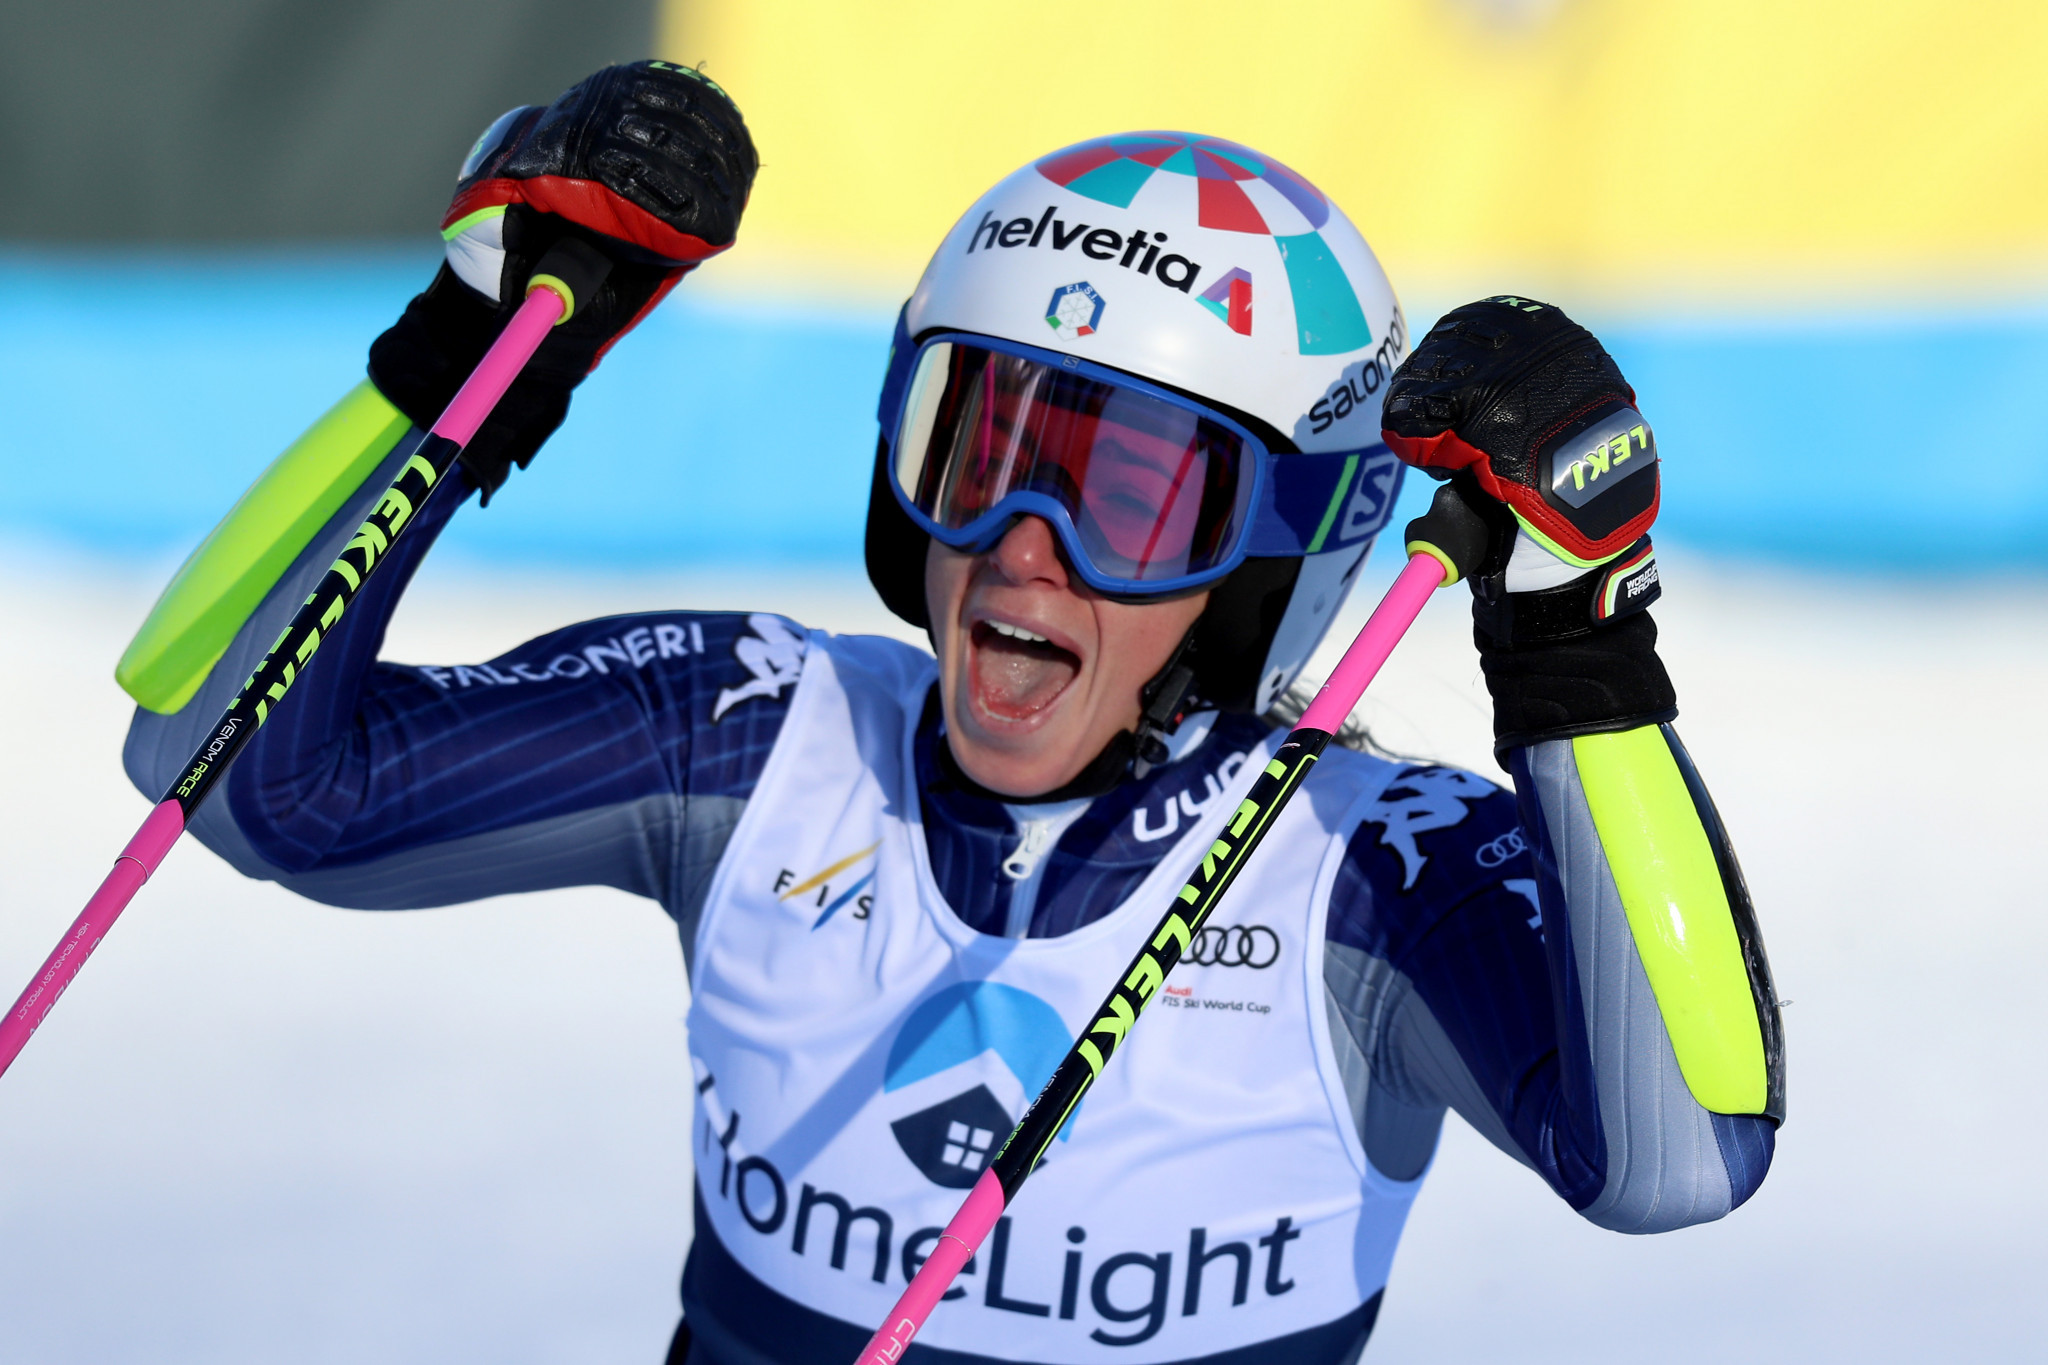 Bassino cashes in with first Alpine Skiing World Cup win in Killington